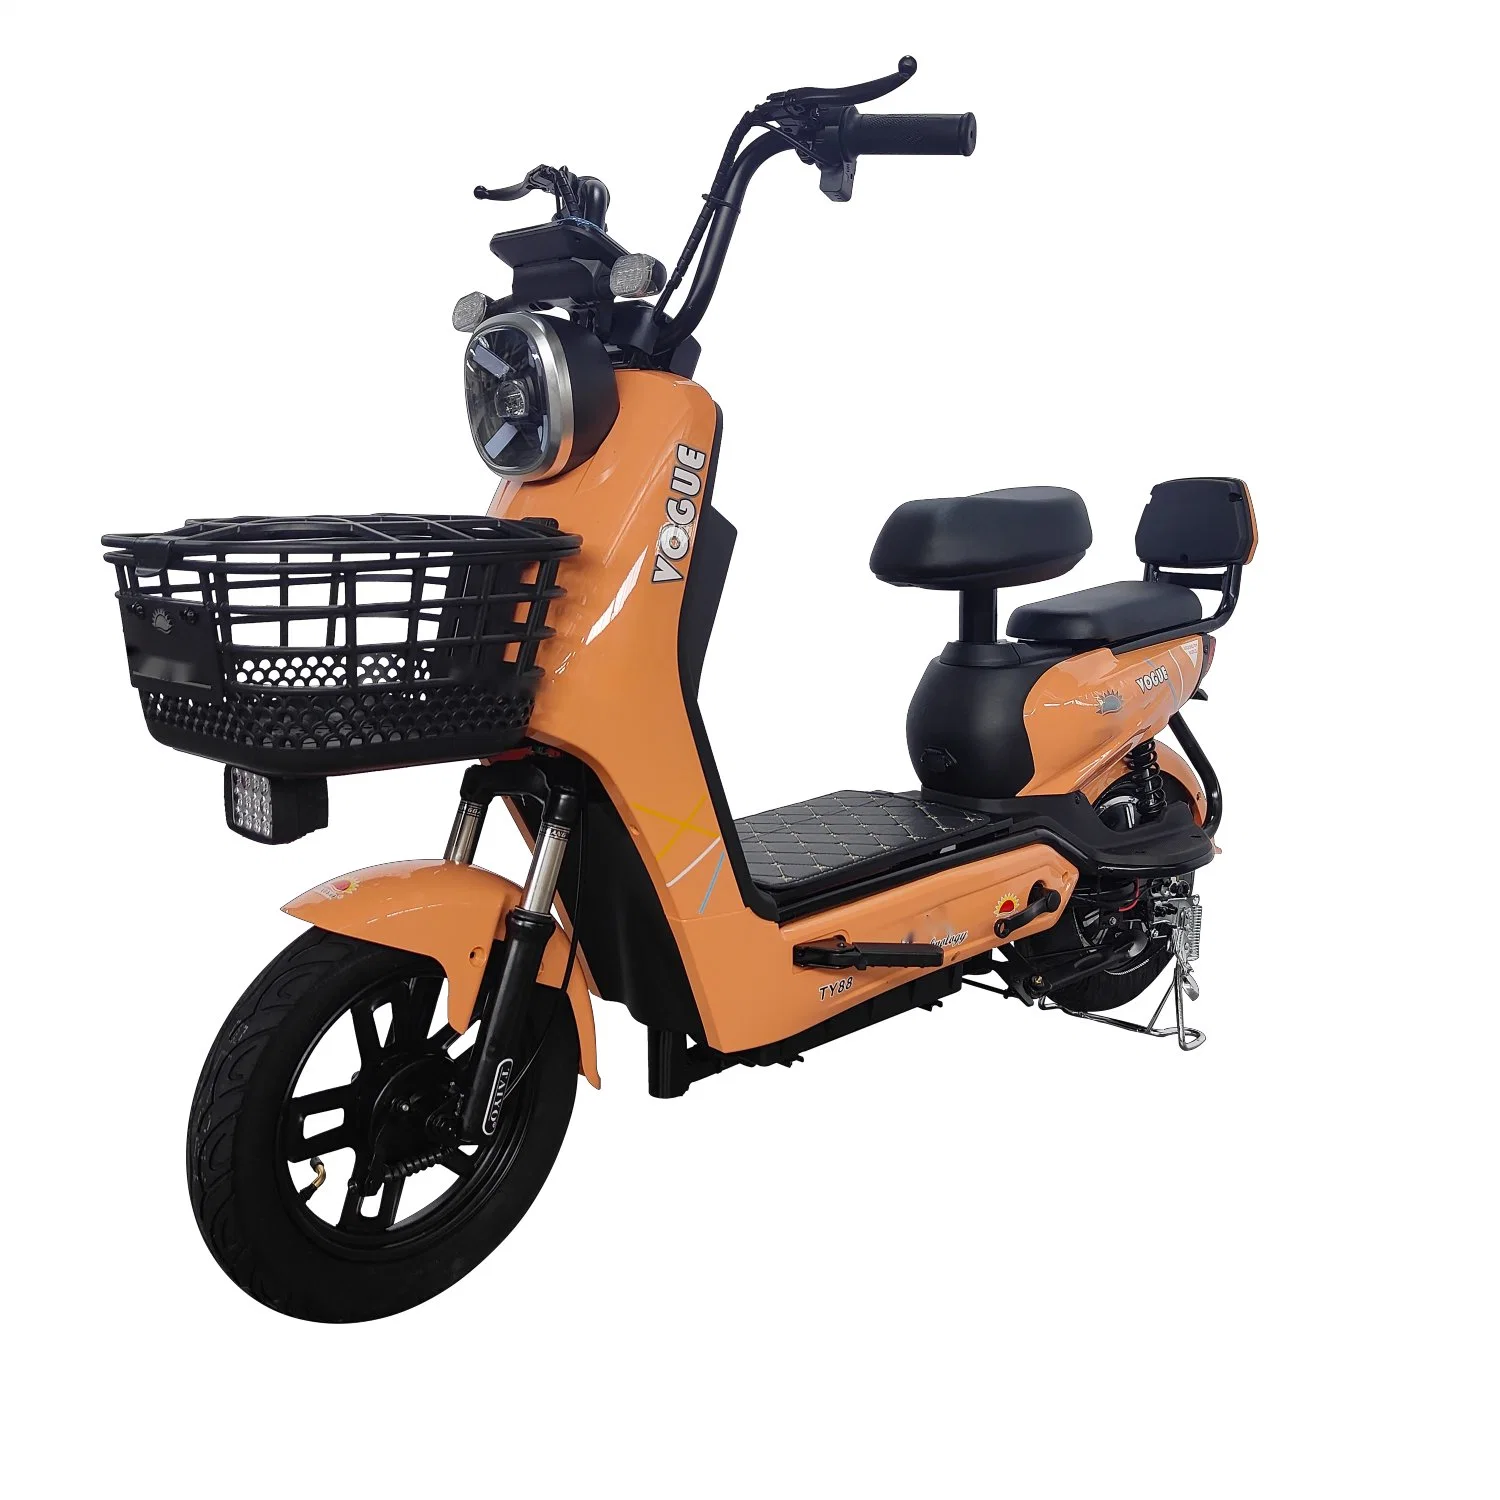 Willstar Ty88 Electric Bicycles with 48V 12ah Storage Battery Operated -Electric Moped